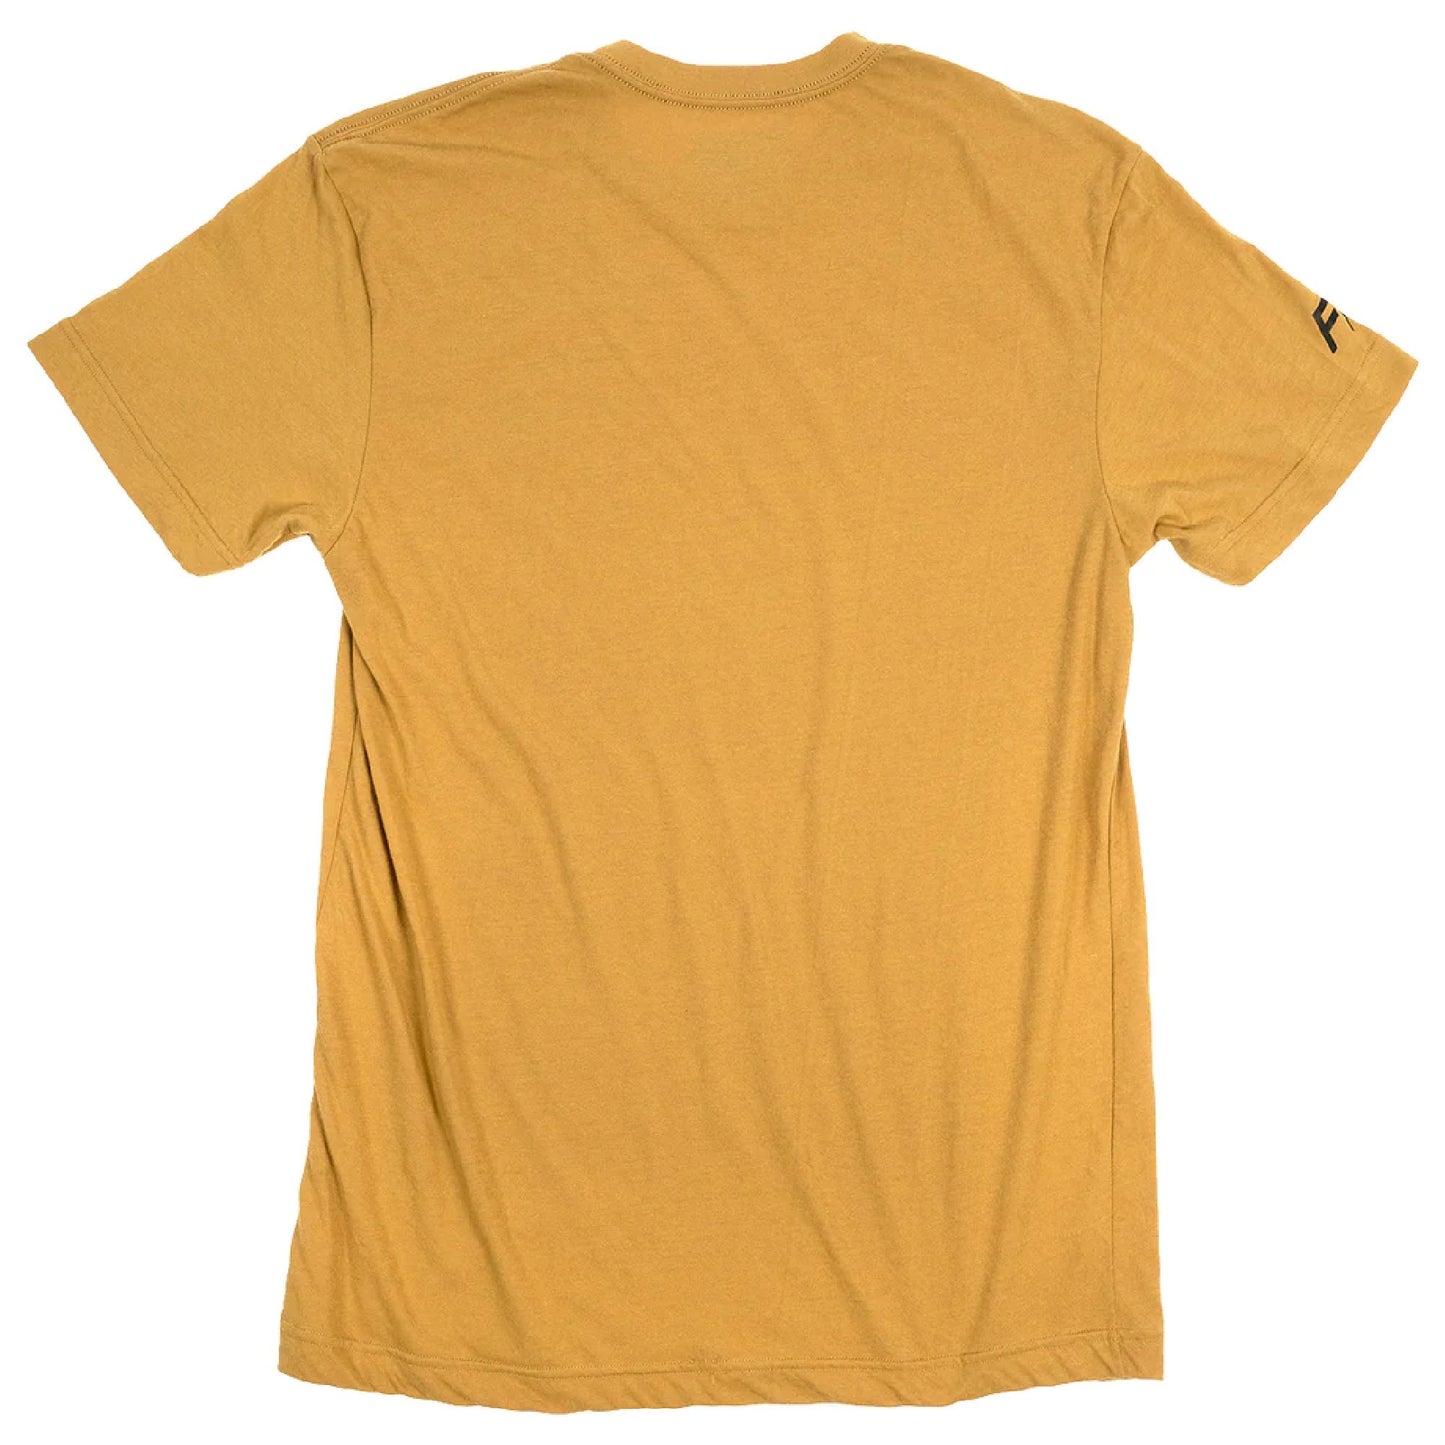 Fasthouse Hierarchy SS Tech Tee Vintage Gold - Fasthouse SS Shirts